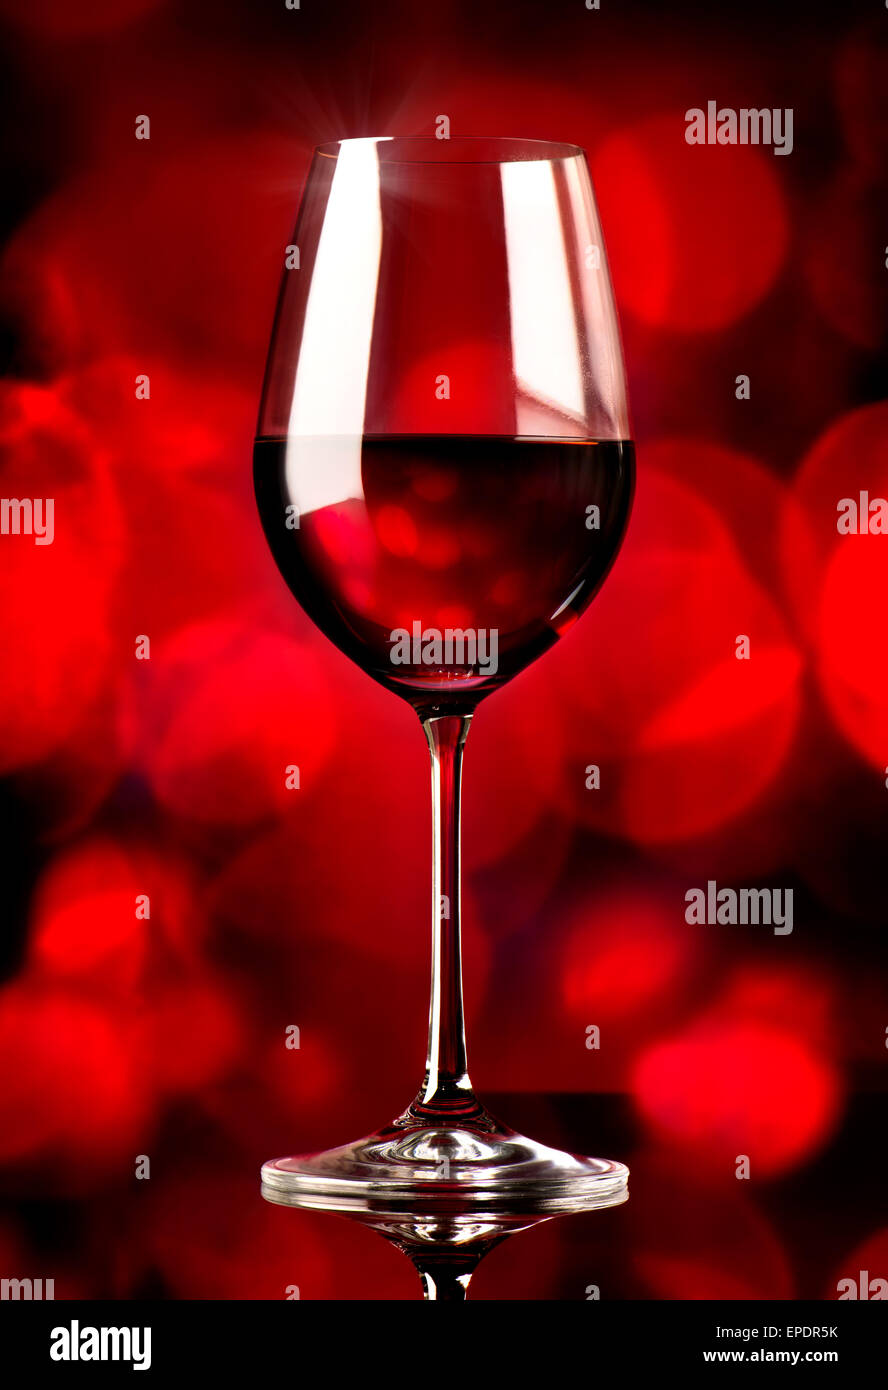 Glass of wine on a red background Stock Photo